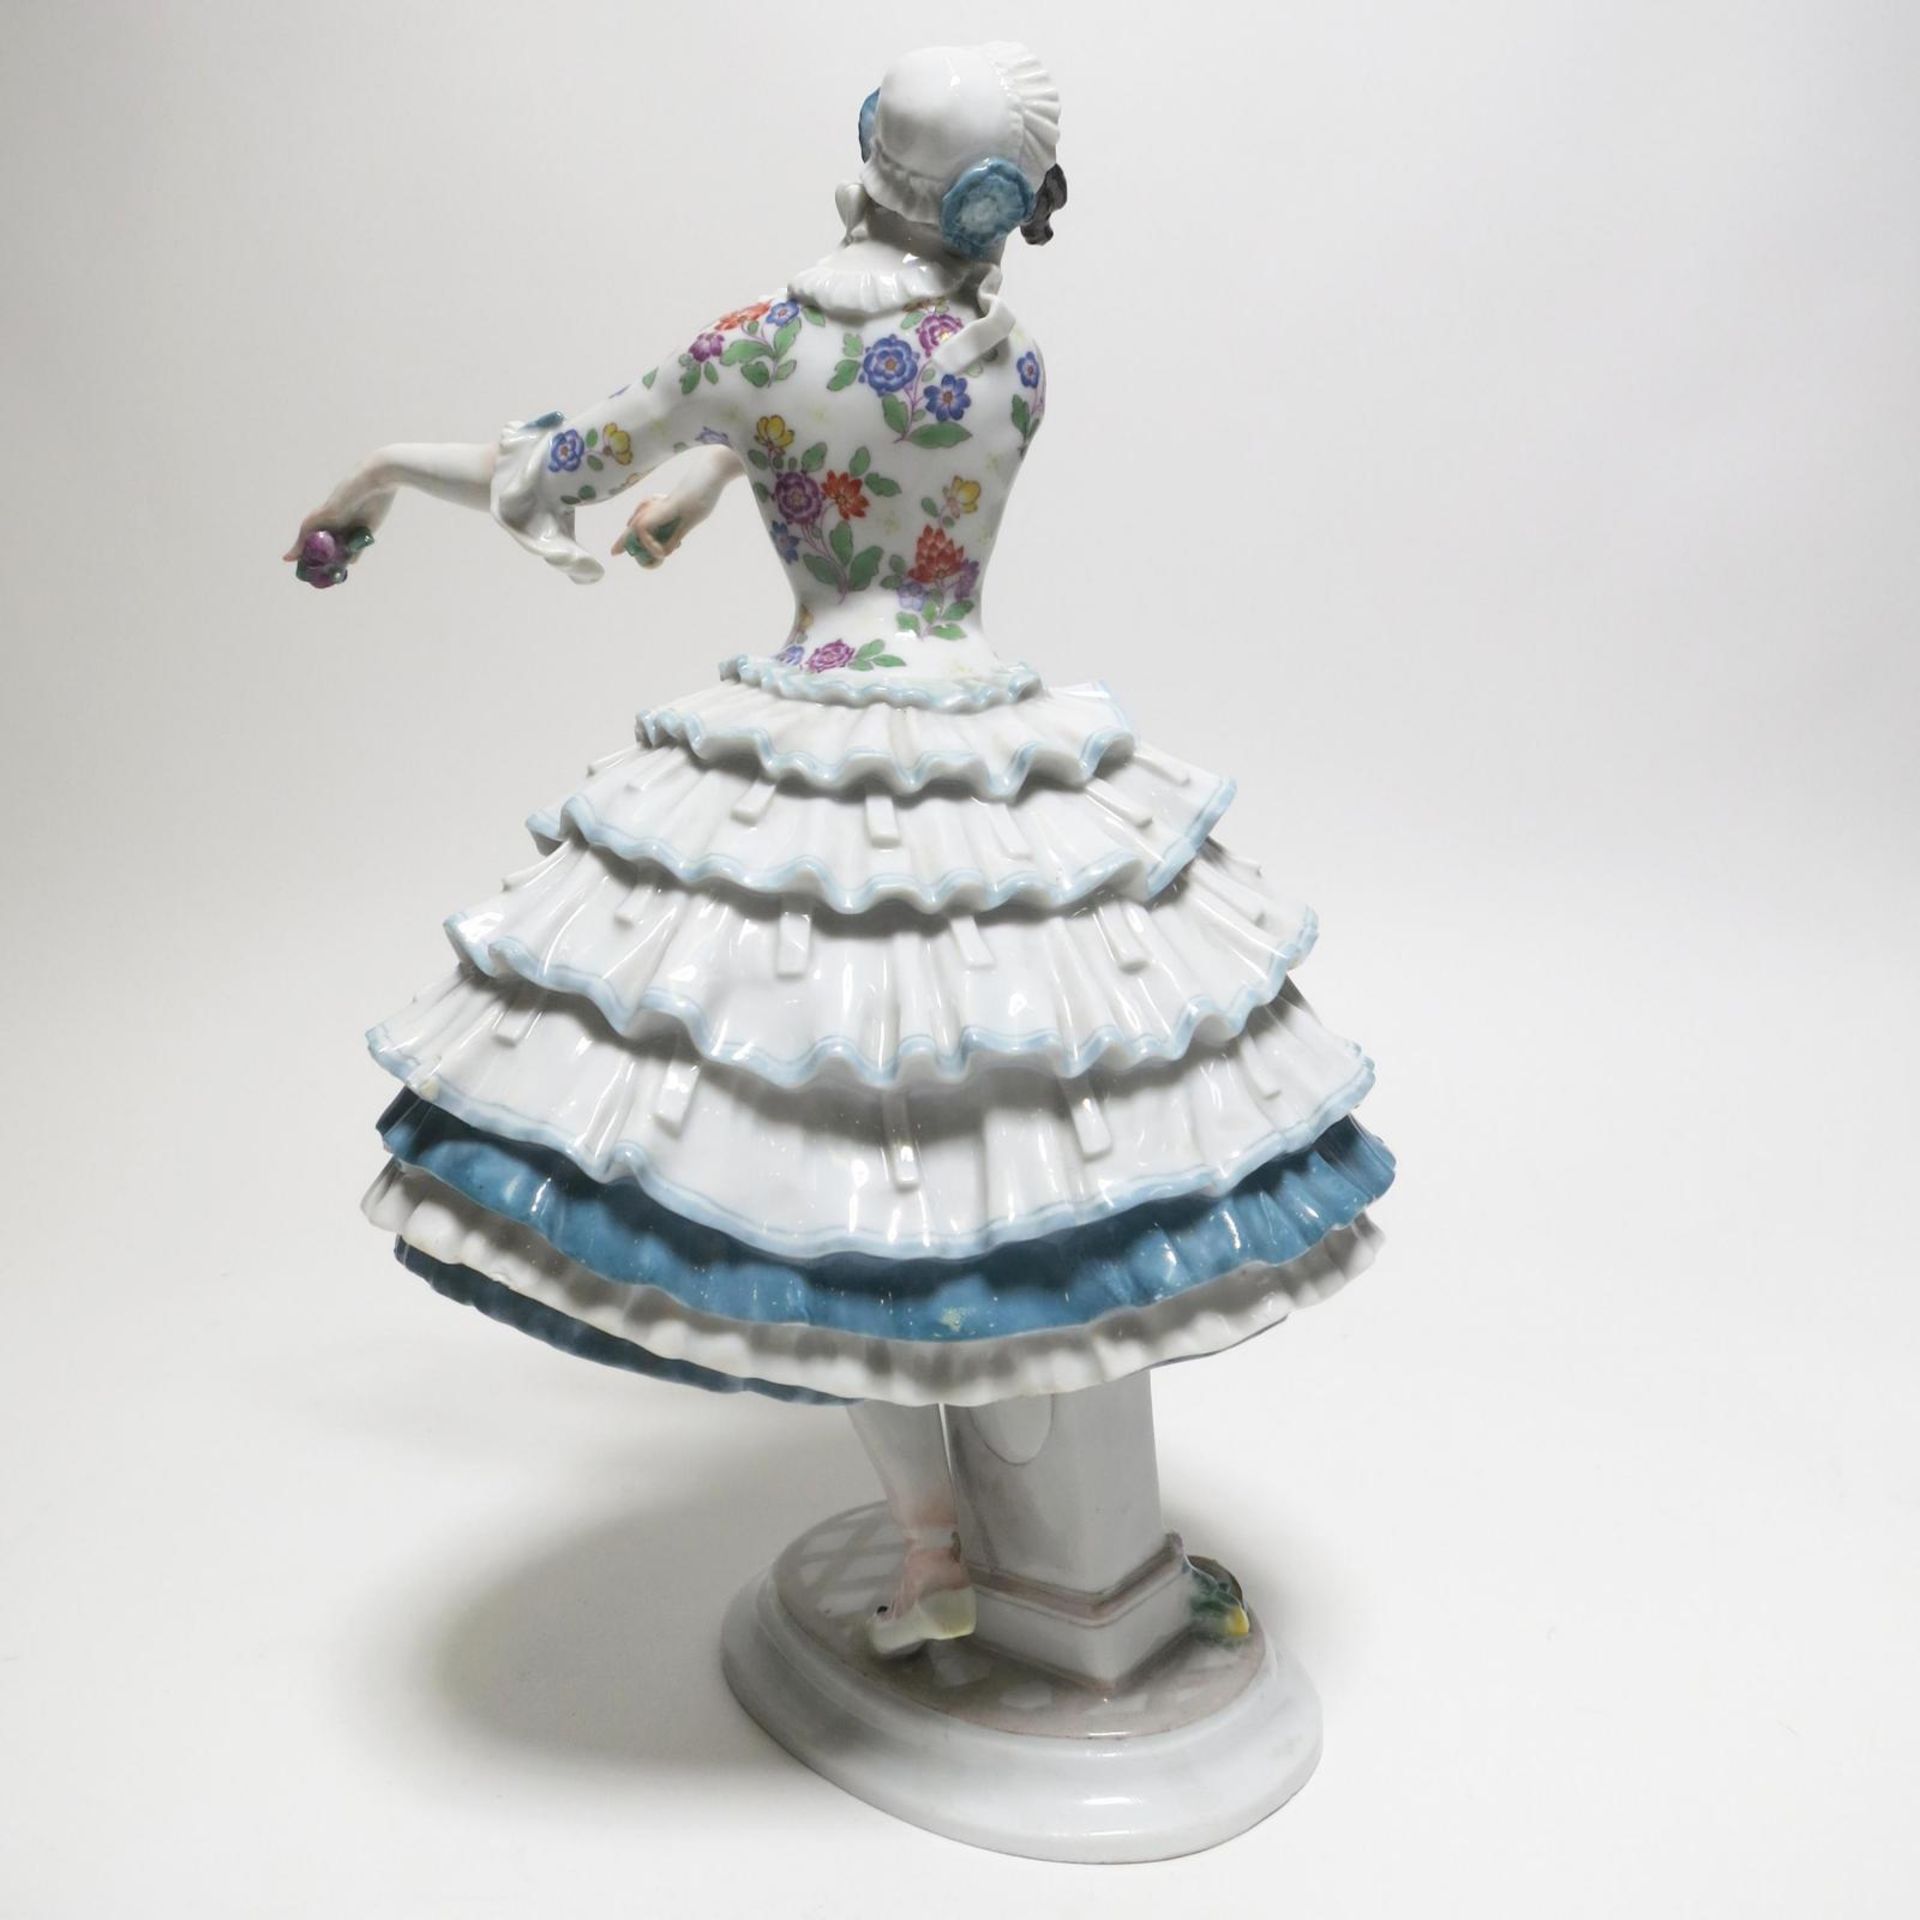 Meissen: PORCELAIN FIGURINES OF THE 'RUSSIAN BALLET' - Image 17 of 49